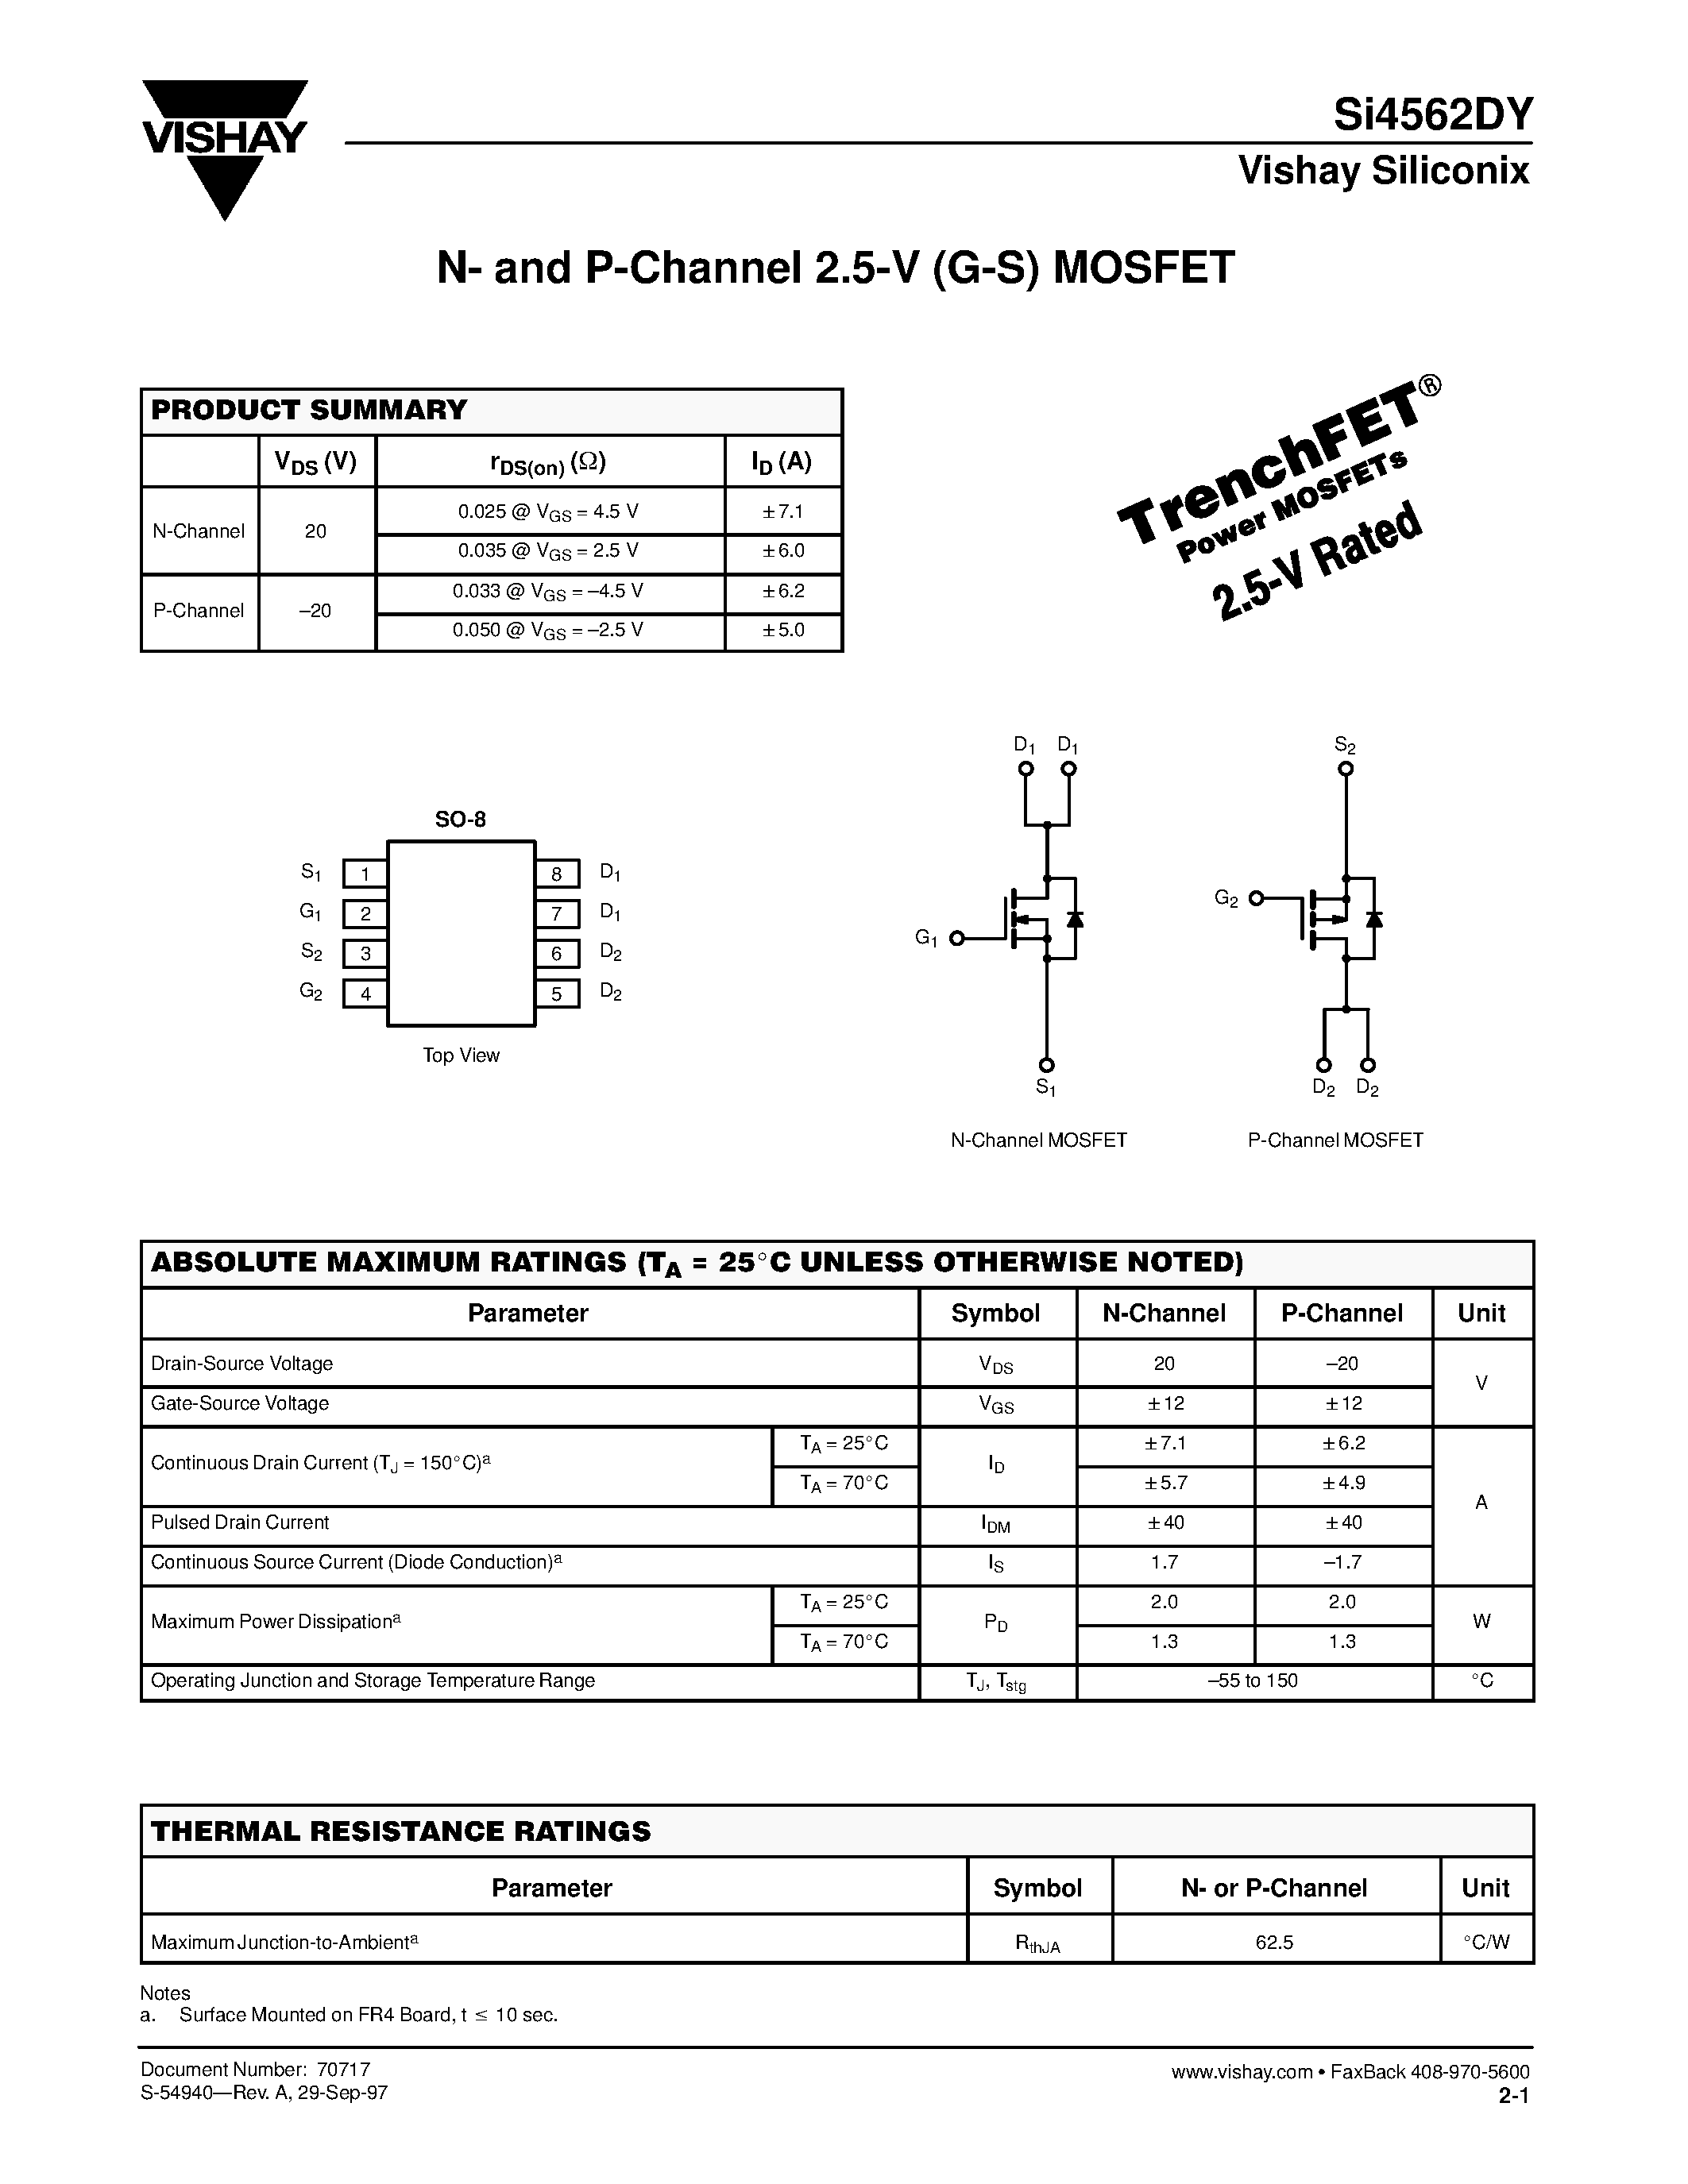 Datasheet SI4562DY - N- and P-Channel 2.5-V (G-S) MOSFET page 1